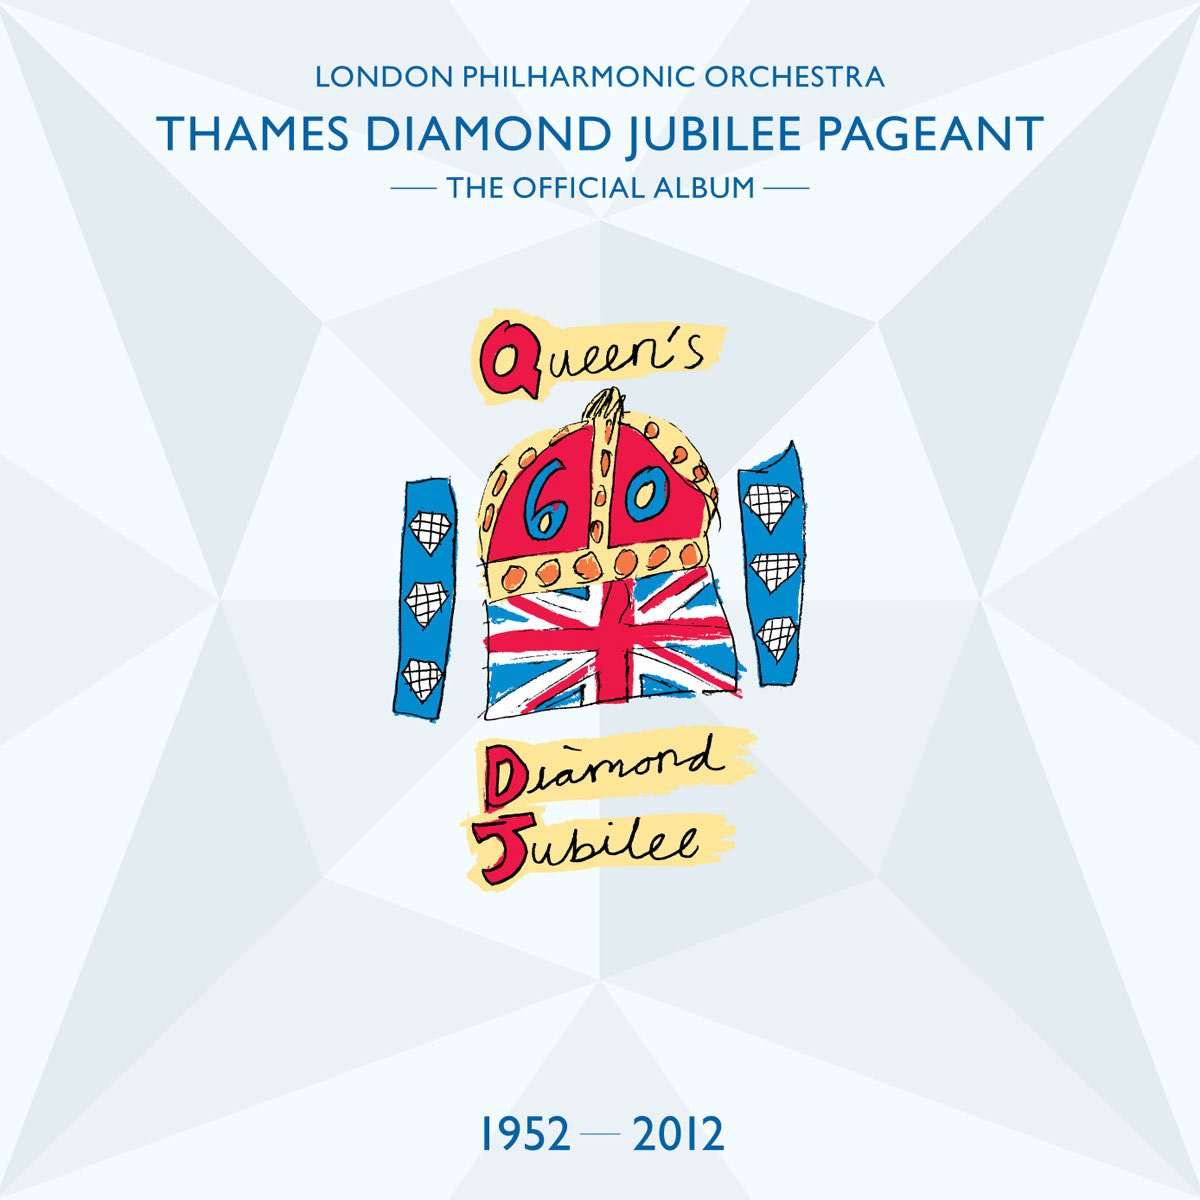 Thames Diamond Jubilee Pageant - London Philharmonic Orchestra